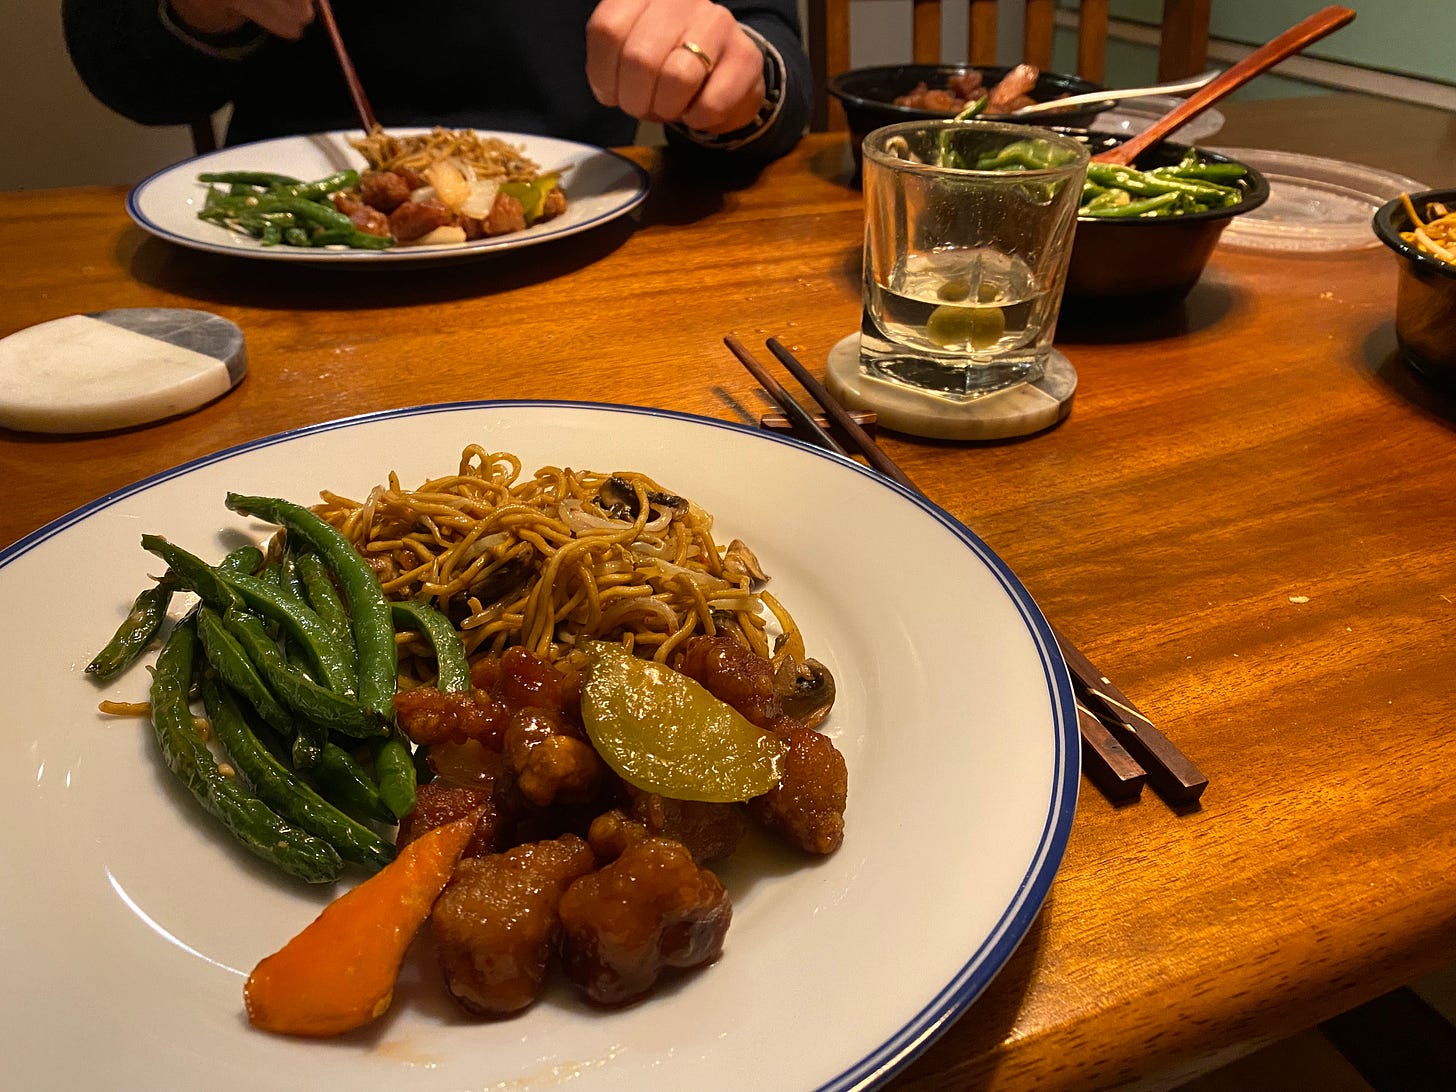 Two plates with Chinese food: green beans in garlic sauce, mushroom chow mein with thin noodles, and sweet and sour pork with carrots and peppers. The takeout containers are visible at the right corner of the frame. Chopsticks sit next to the plate in the foreground.